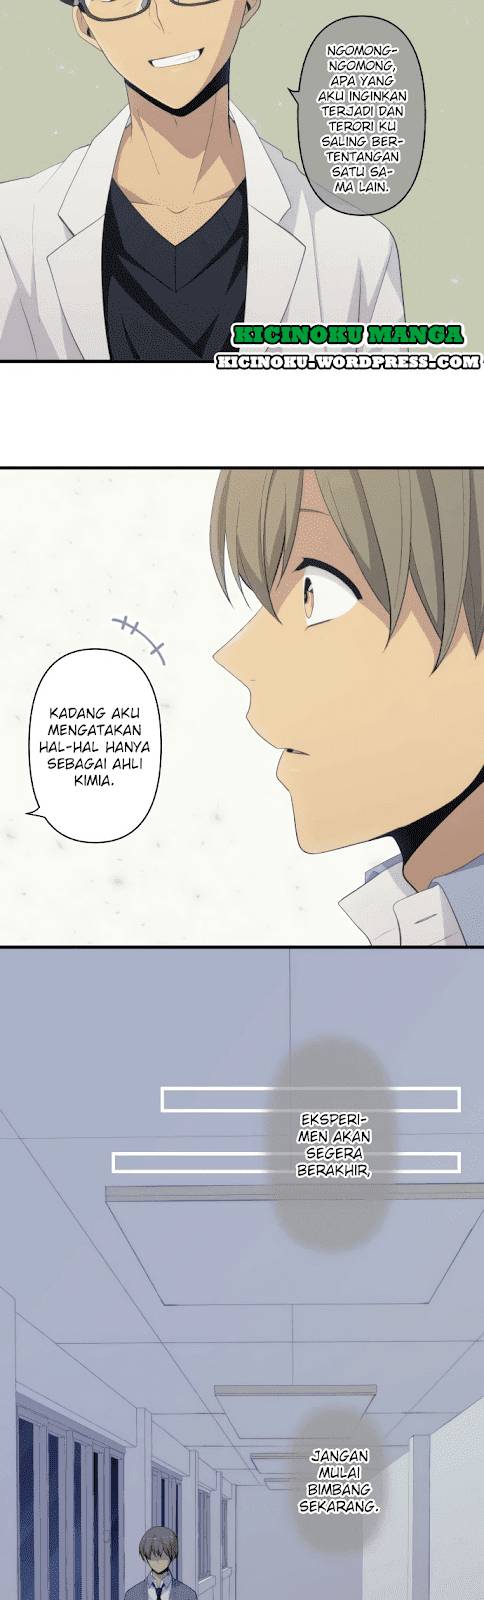 ReLIFE Chapter 204